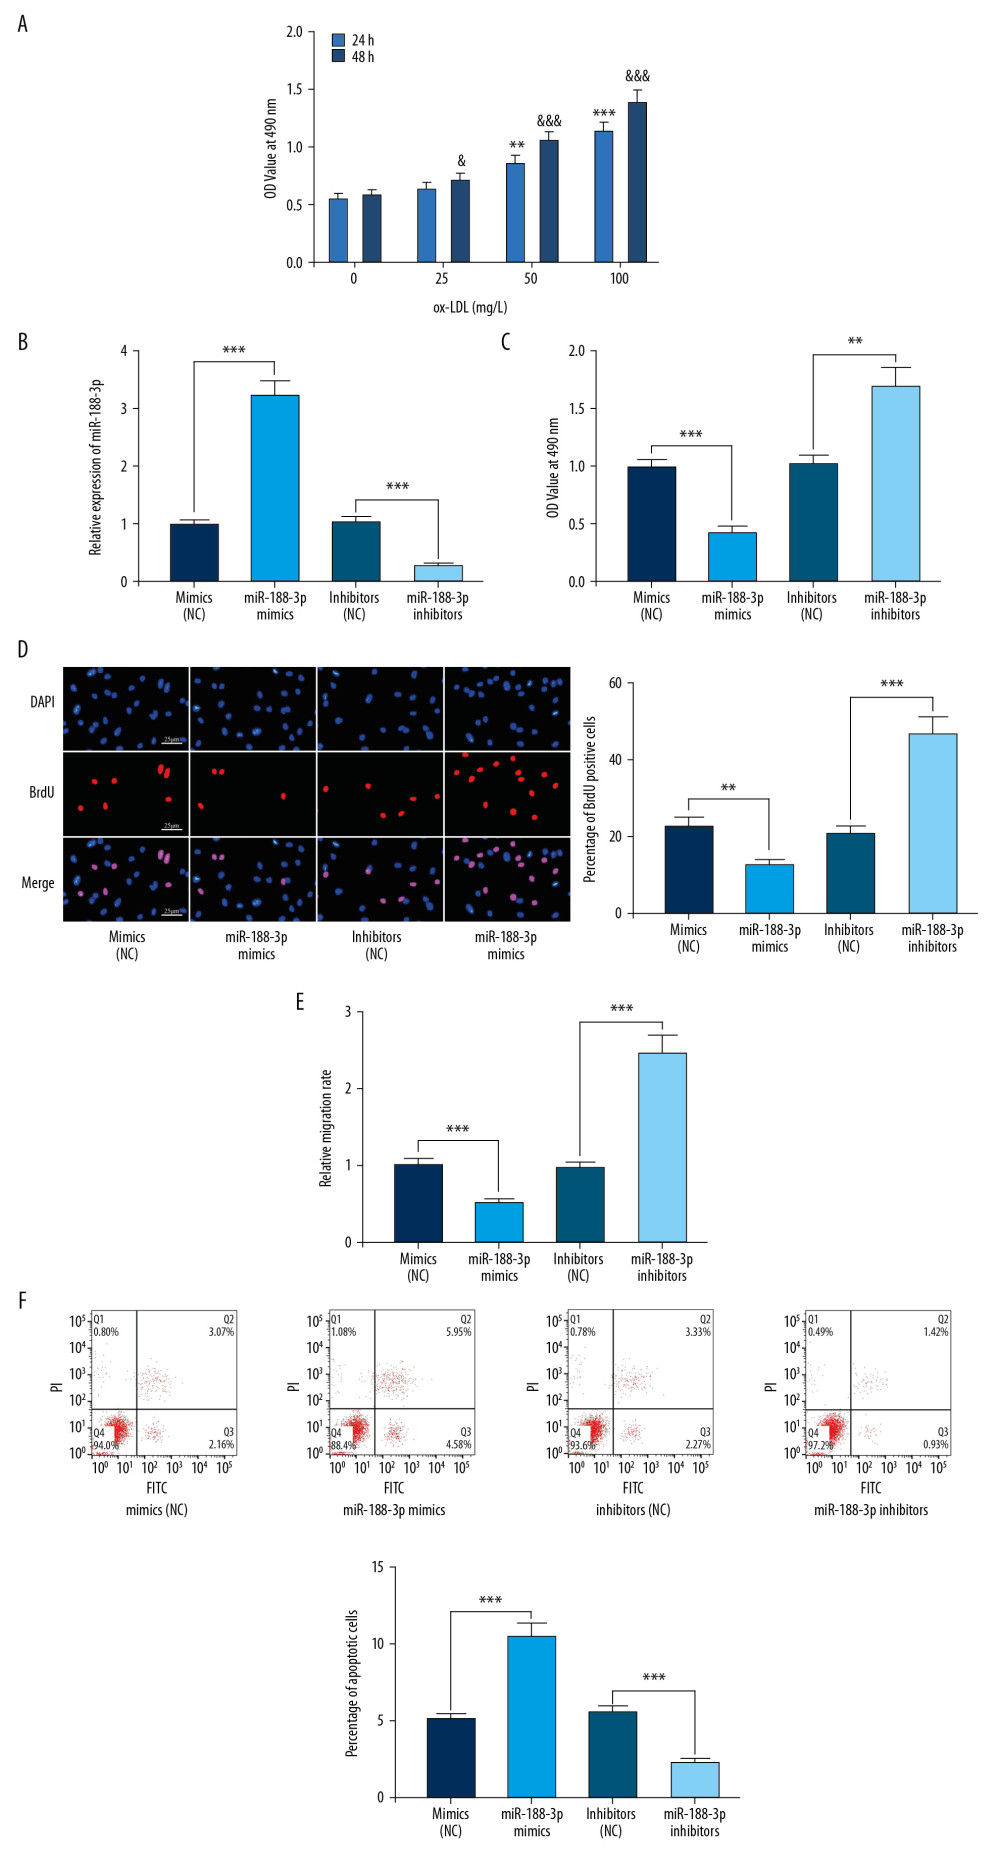 Effect of miR-188-3p on VSMCs. (A) The effects of ox-LDL with different treatment durations and concentrations on the viability of VSMCs were detected using the MTT assay. (B) The establishment of miR-188-3p overexpression and low-expression cell models was validated using qRT-PCR. (C) The effect of miR-188-3p on VSMCs proliferation was examined using the MTT assay. (D) The effect of miR-188-3p on the proliferation of VSMCs was examined using the BrdU assay. (E) The effect of miR-188-3p on the migration of VSMCs was examined using the Transwell assay. (F) The effect of miR-188-3p on apoptosis of VSMCs was examined using flow cytometry. ** P<0.01, and *** P<0.001. In A, ** P<0.01, and *** P<0.001, compared with the 0 mg/L group after 24 h of ox-LDL treatment; & P<0.05, and &&& P<0.001, respectively, compared with the 0 mg/L group after 48 h of ox-LDL treatment.